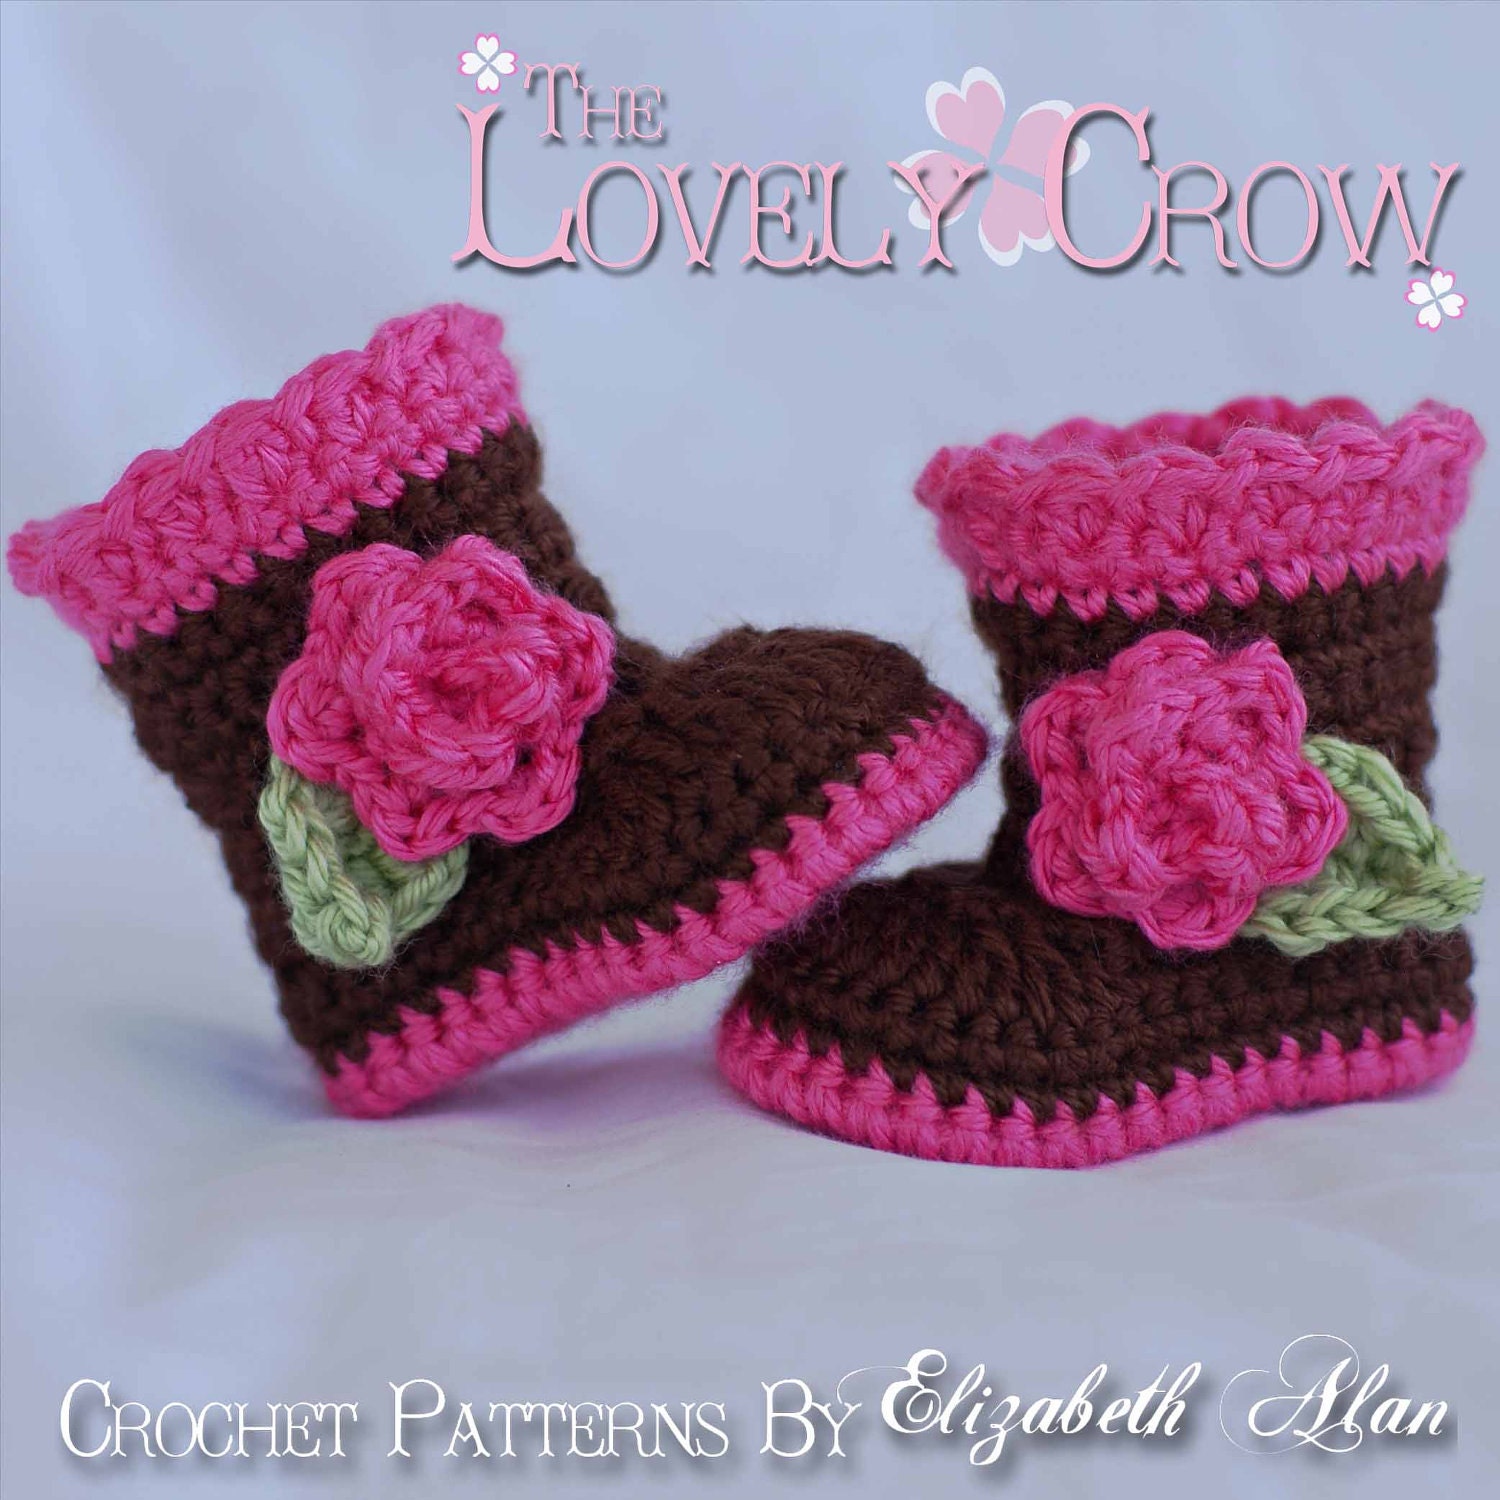 Baby Crochet Pattern Baby  for Sugar and Spice Boots -  4 sizes - Newborn to 12 months.